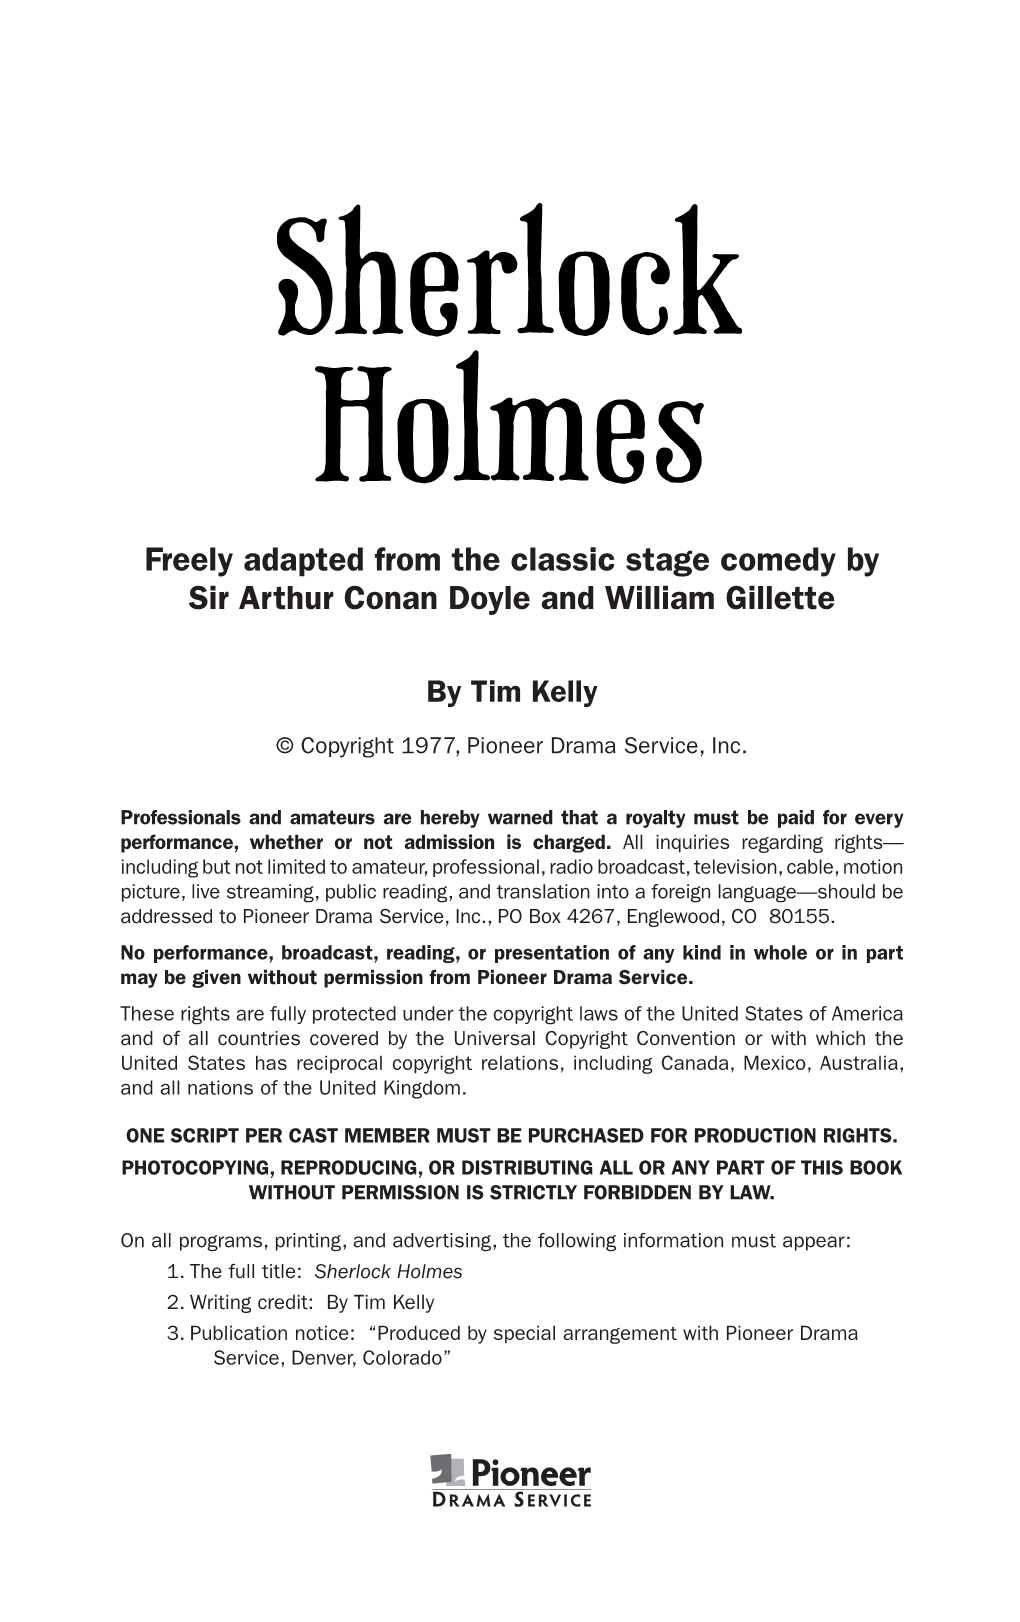 Freely Adapted from the Classic Stage Comedy by Sir Arthur Conan Doyle and William Gillette